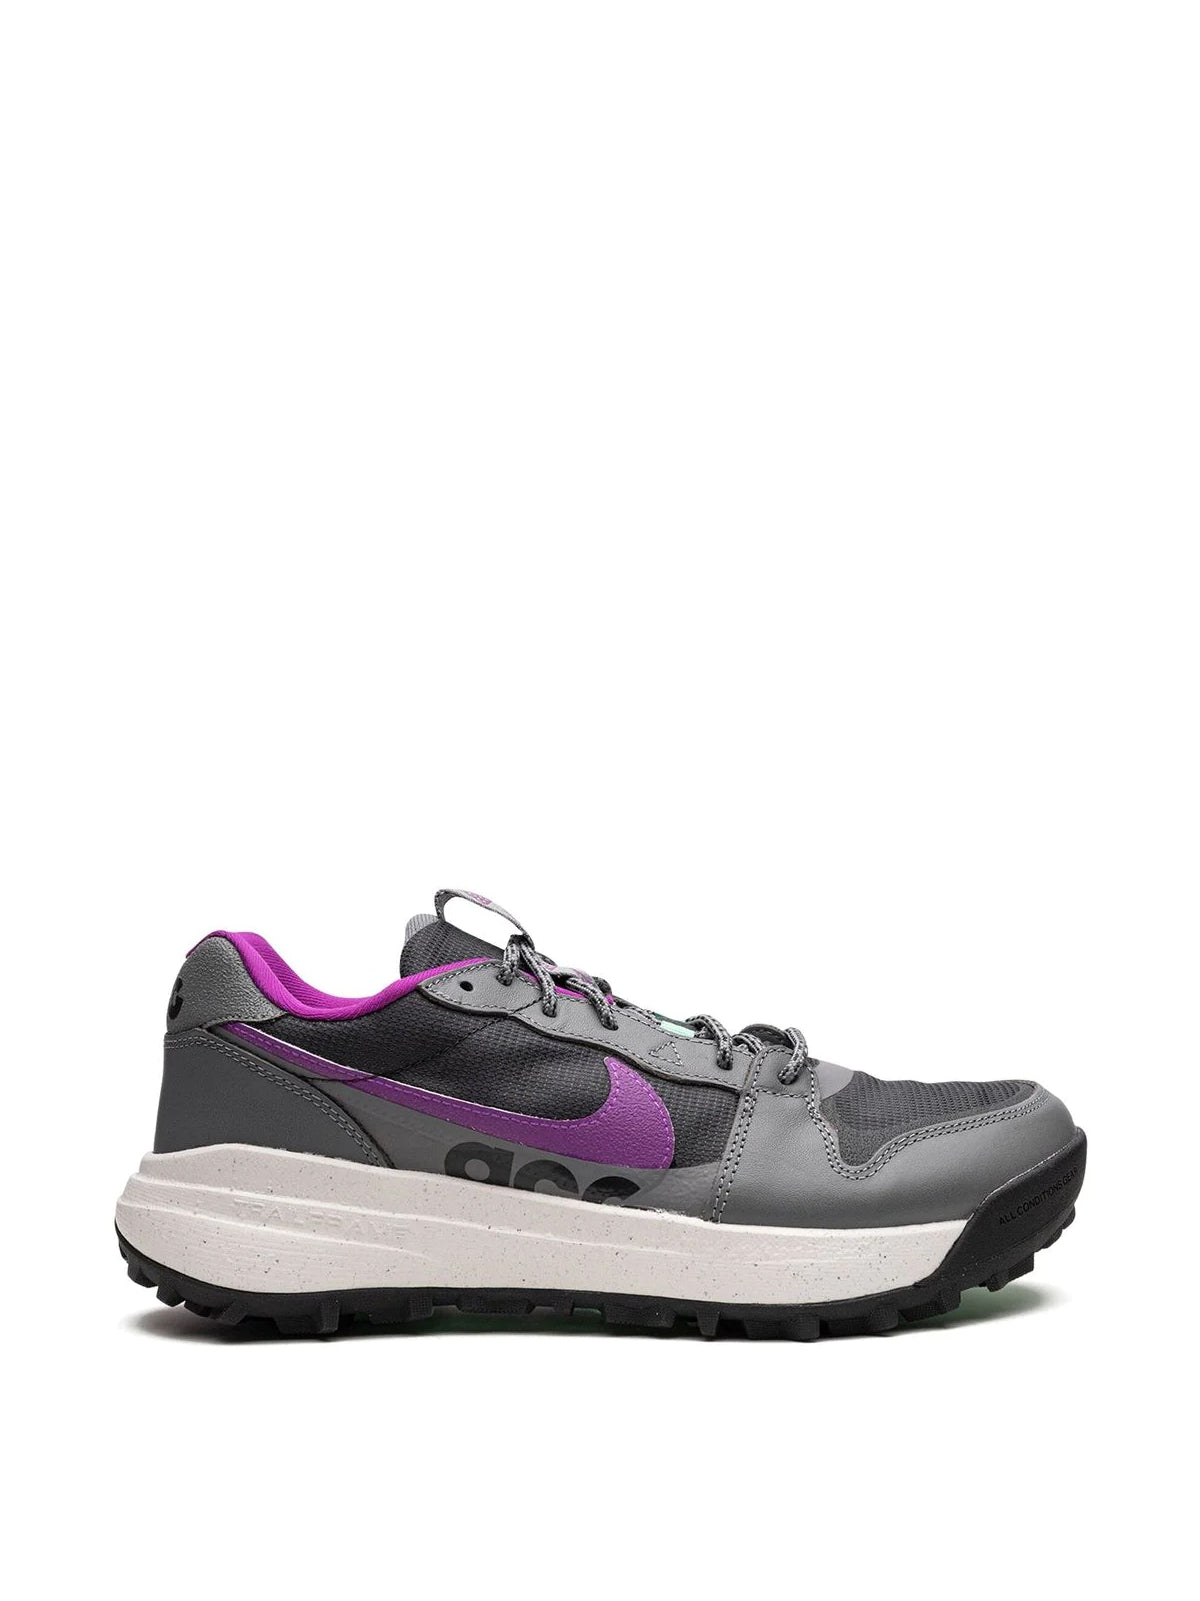 Nike-OUTLET-SALE-ACG Lowcate Smoke Grey Sneakers-ARCHIVIST